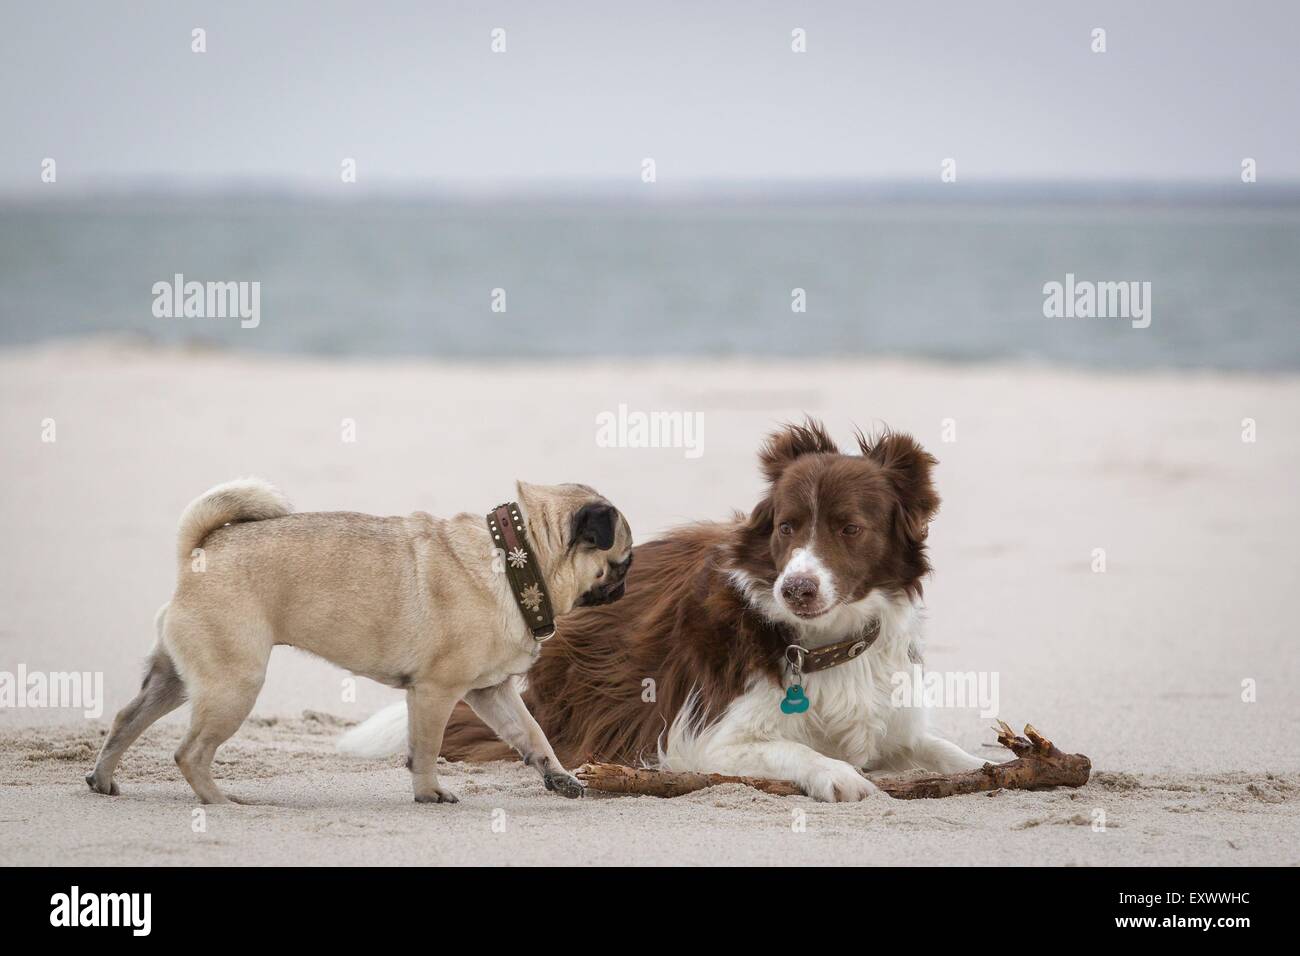 Pug dog and Border Collie at beach, Sylt, Schleswig-Holstein, Germany, Europe Stock Photo